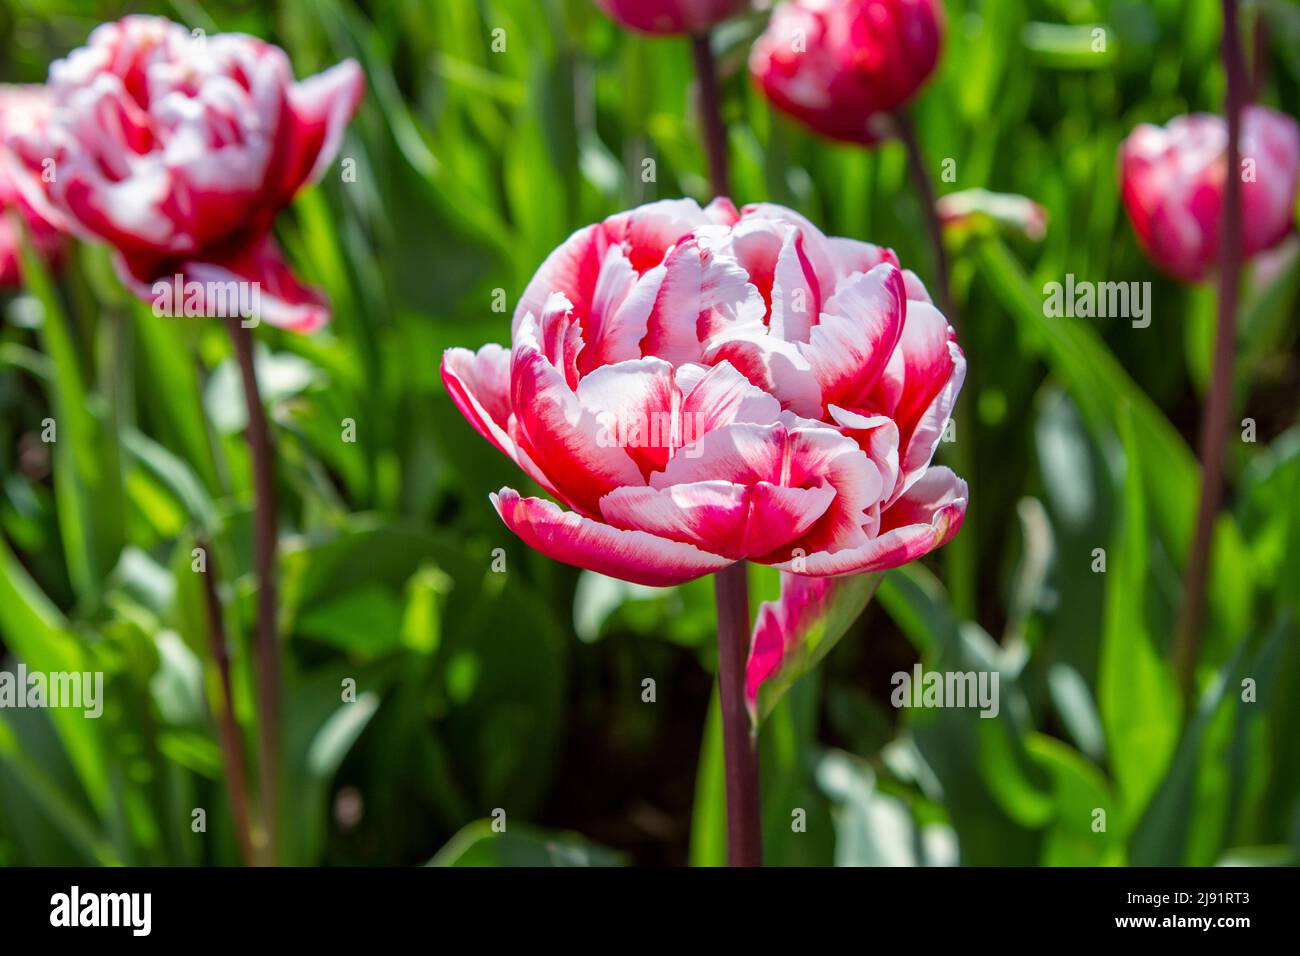 Closeup image of a bright pink and white Columbus tulip (tulipa) blooming in a sunny spring garden. Stock Photo